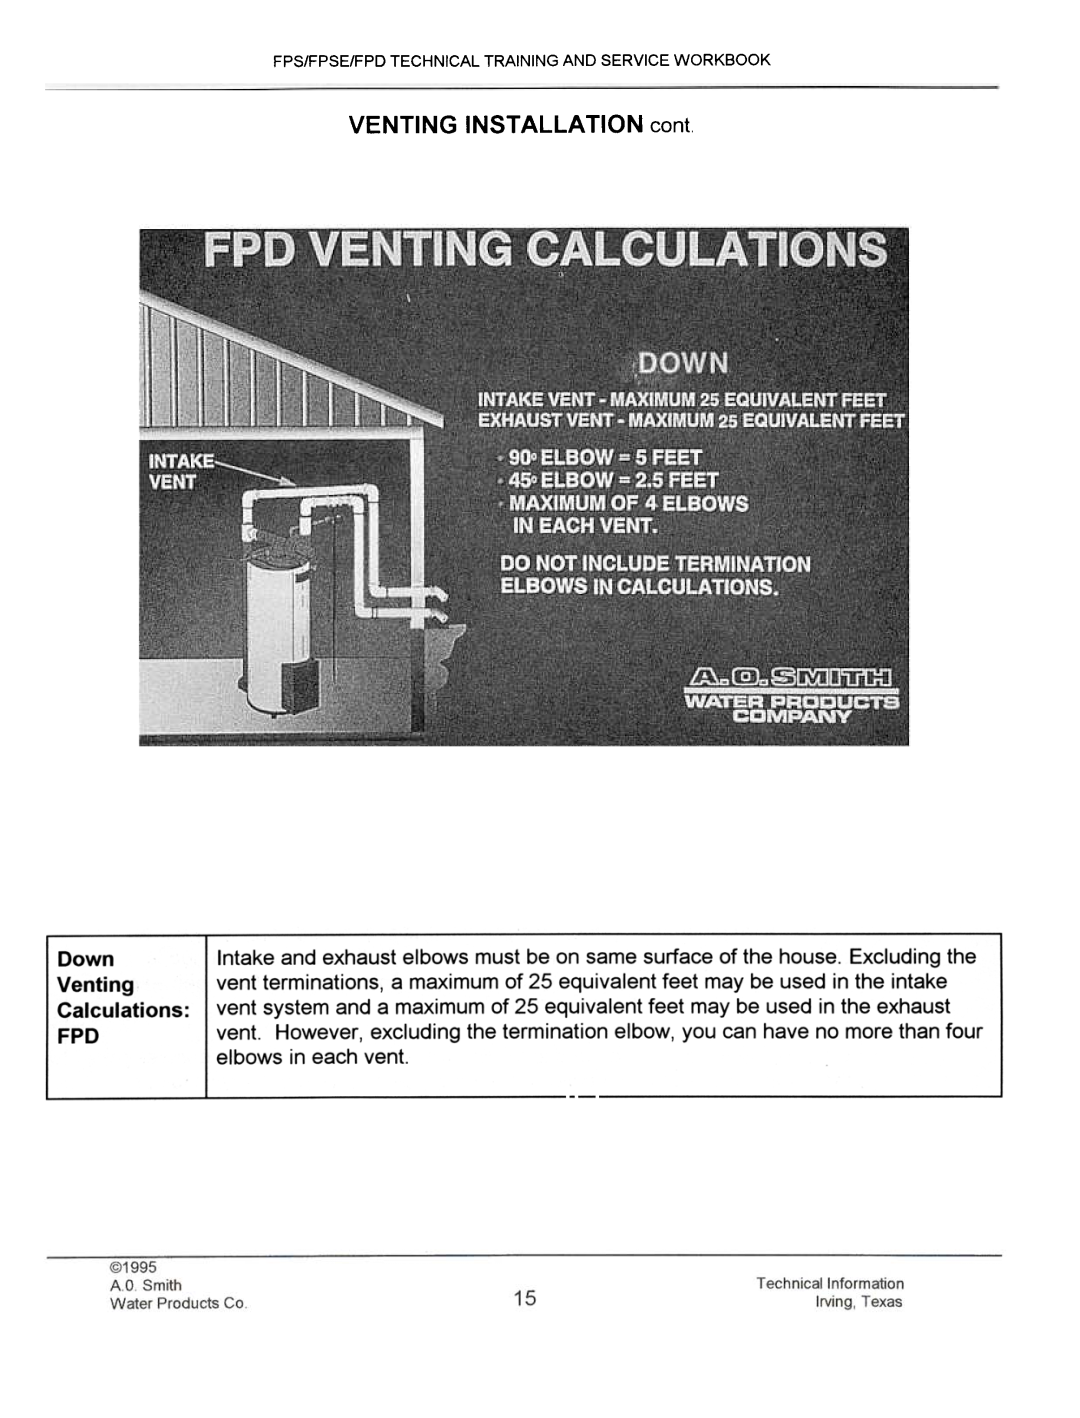 A.O. Smith FPSE50, fps50, FPS40, FPS 75 manual VENTING INSTAllATION cant, Fps/Fpse/Fpd Technical Training And Service Workbook 